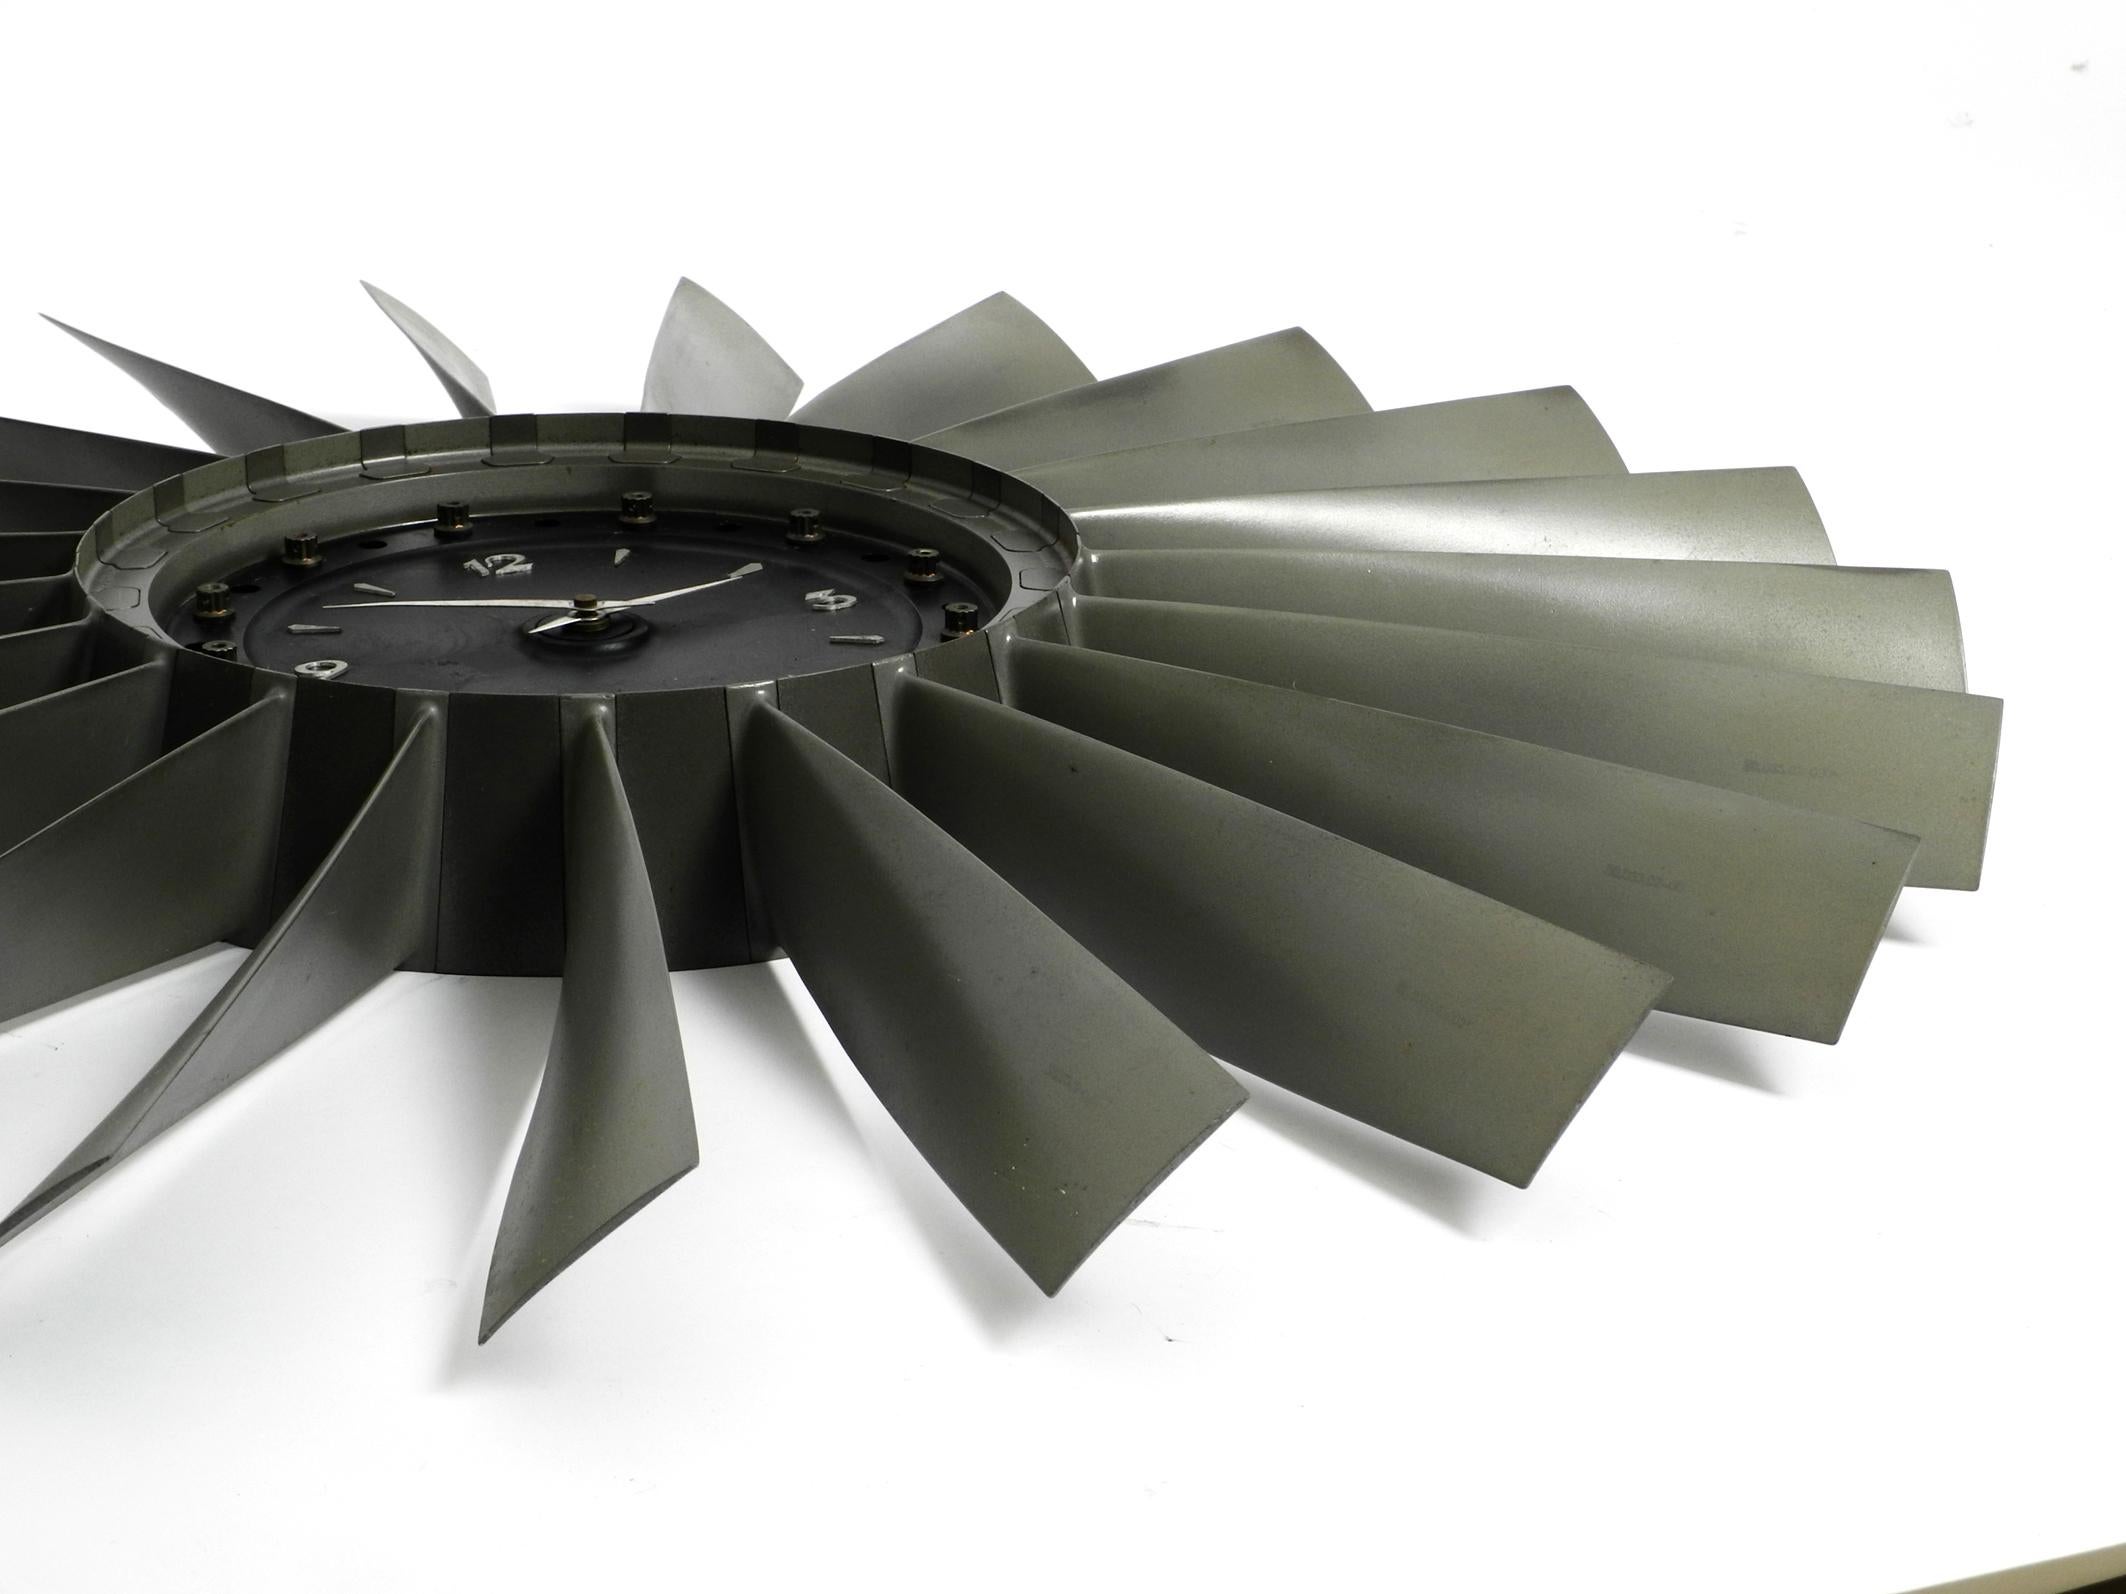 German Huge Wall Clock with Blade Turbine from a Lockheed F-104 Starfighter from 1990 